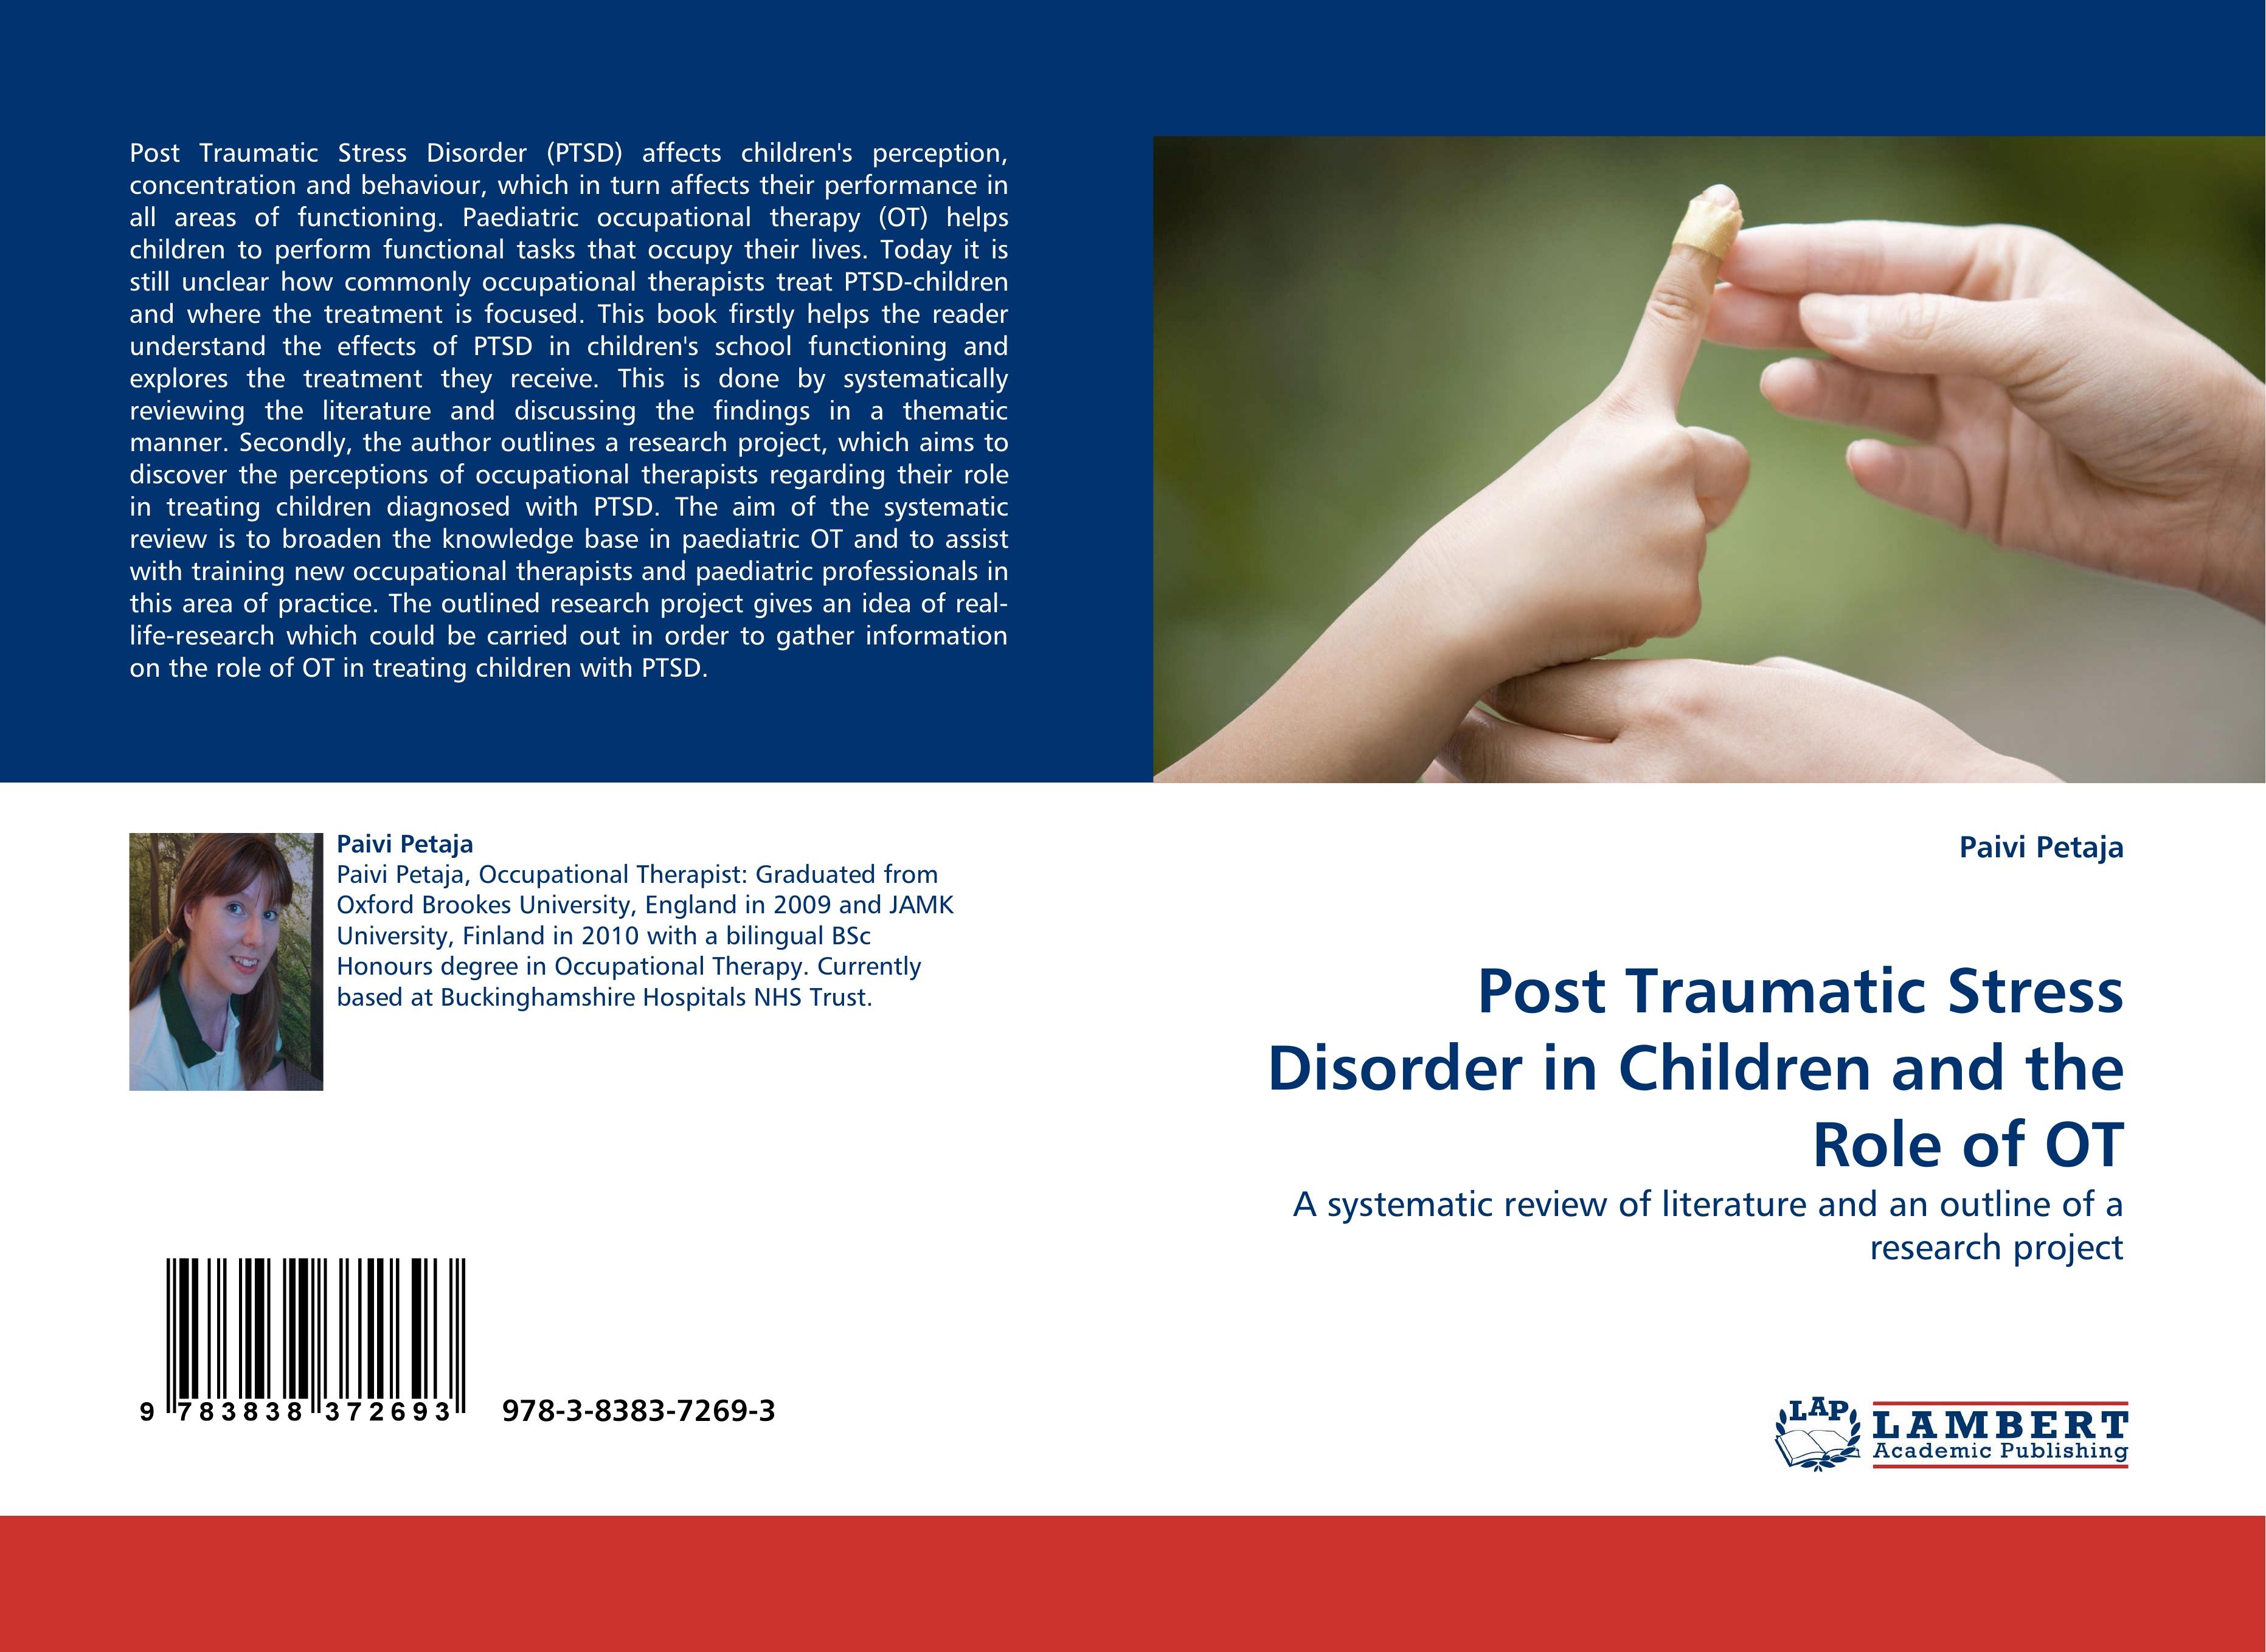 Post Traumatic Stress Disorder in Children and the Role of OT - Petaja, Paivi